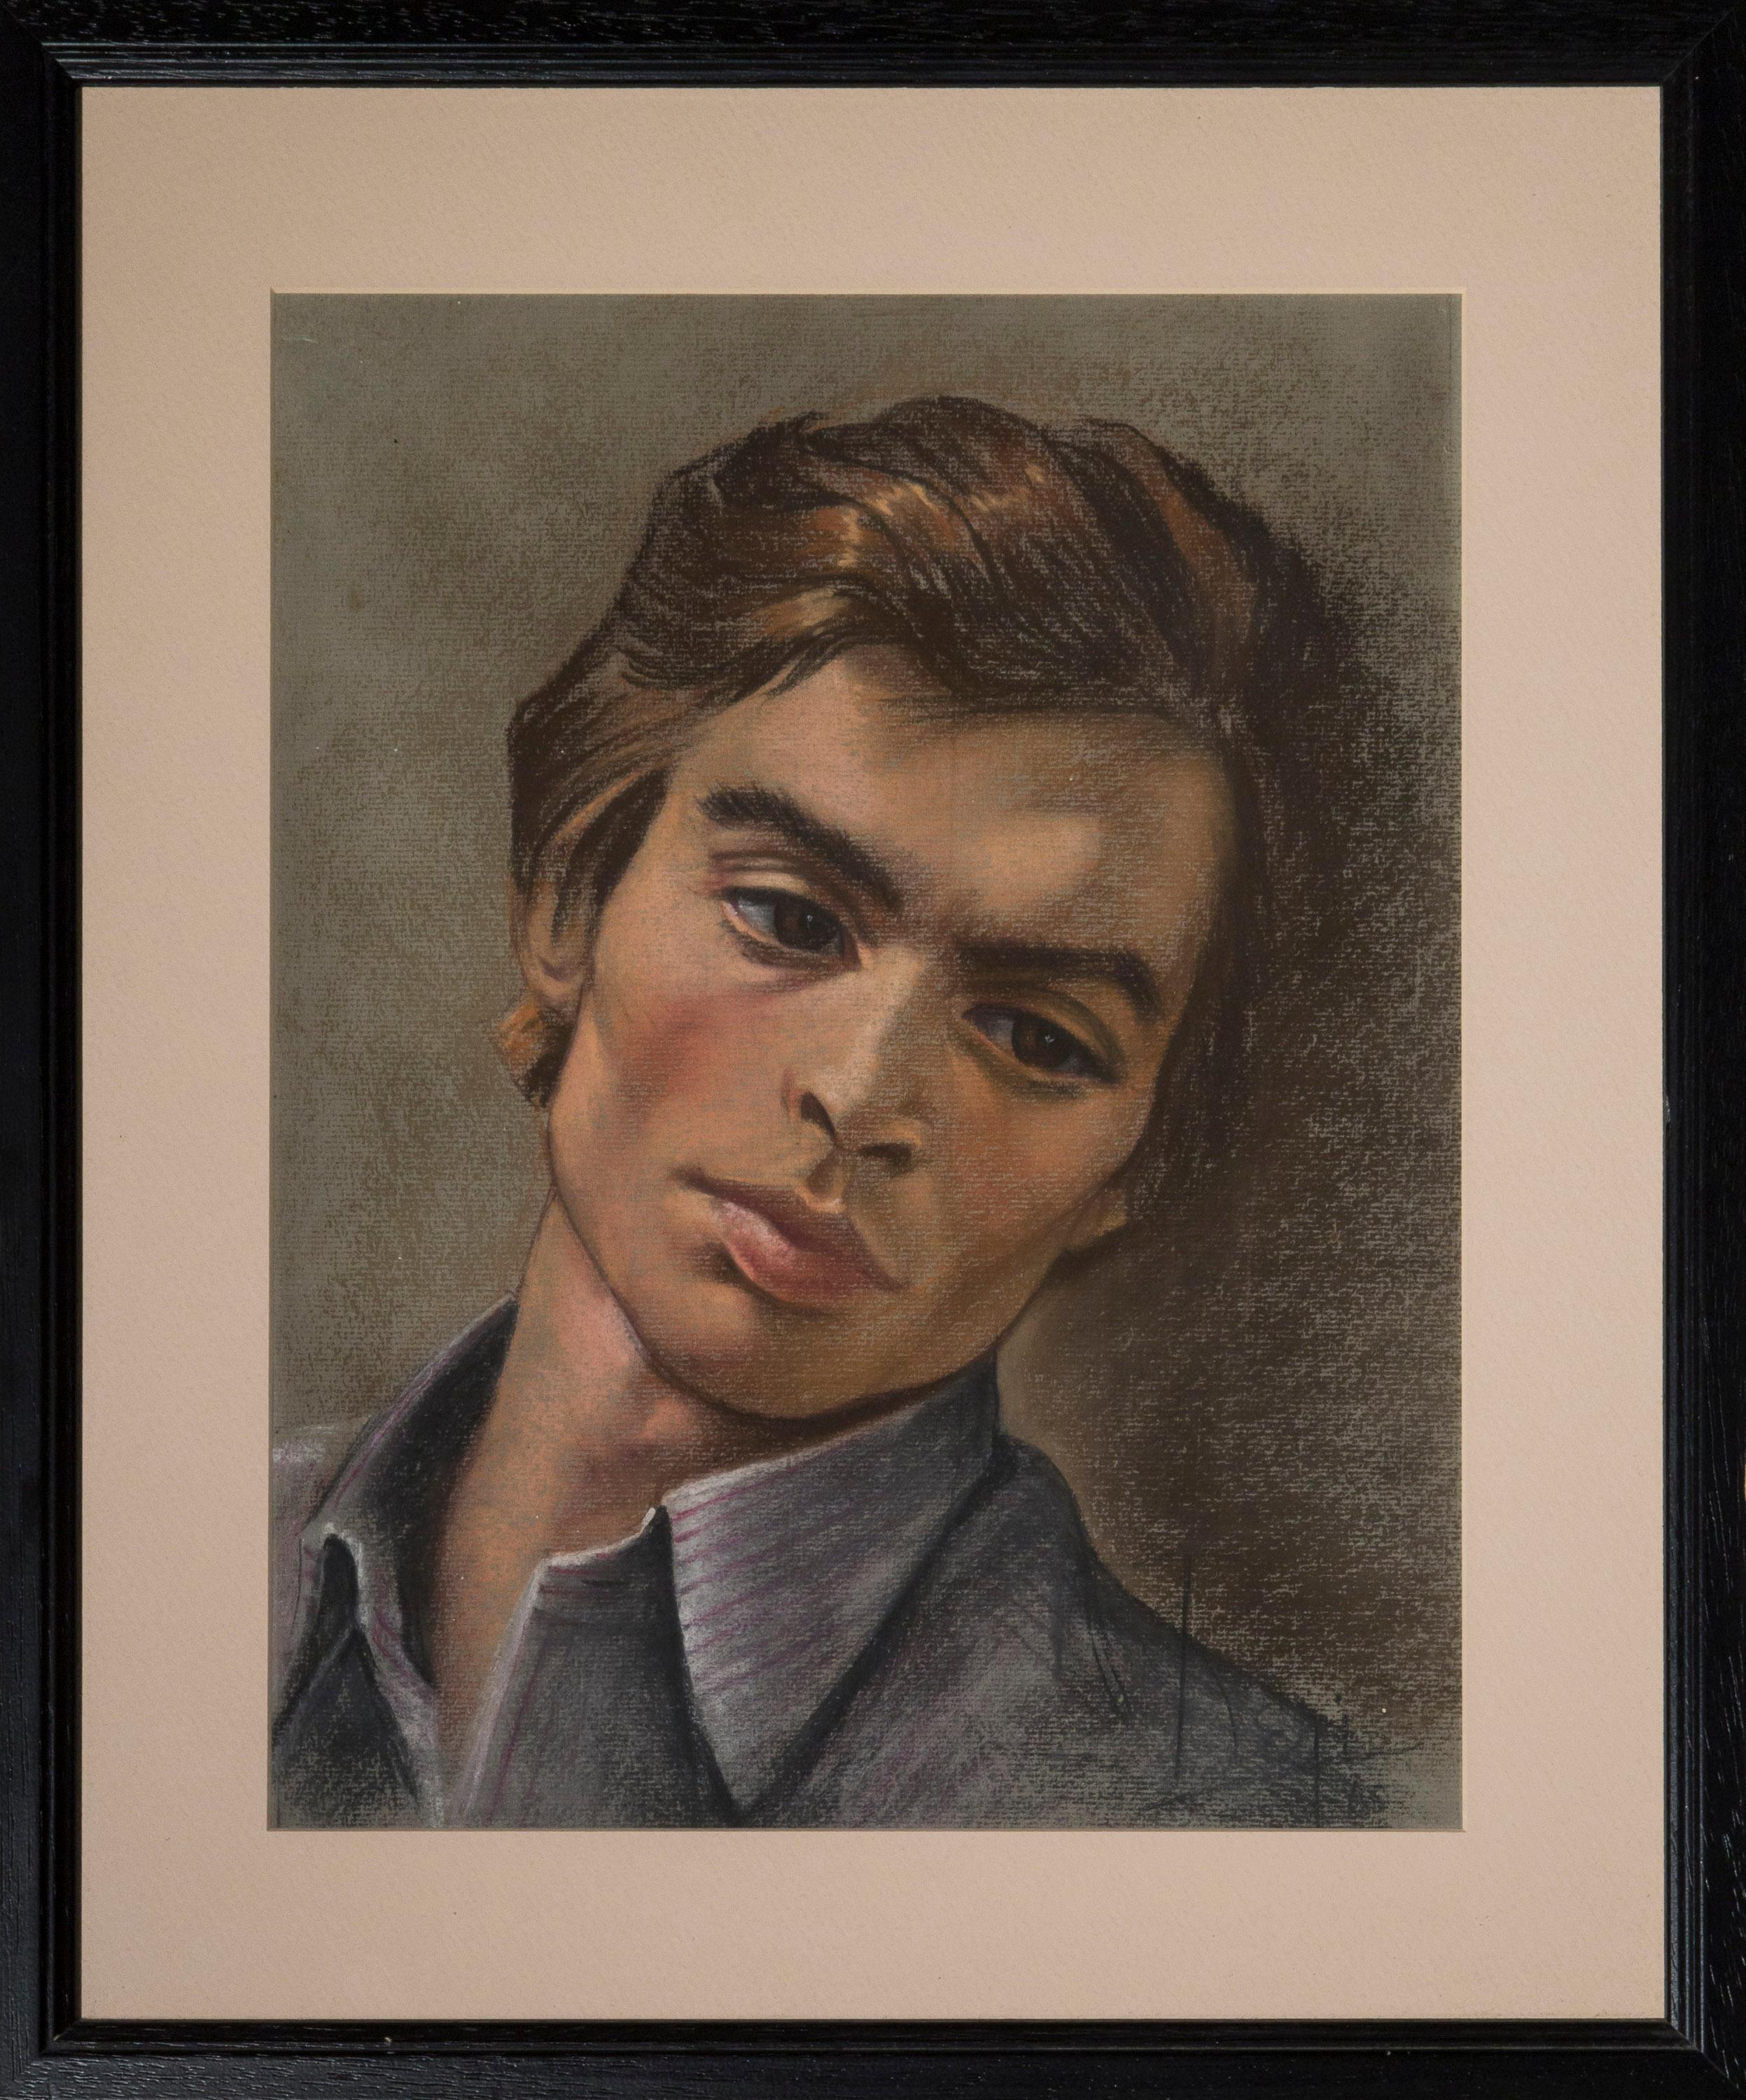 A handsome portrait of Rudolf Nureyev, signed indistinctly lower right and dated '65, pencil on paper.

Measures:
Unframed: 11 by 14.5 inches
Framed: 16.5 by 19.75 inches.